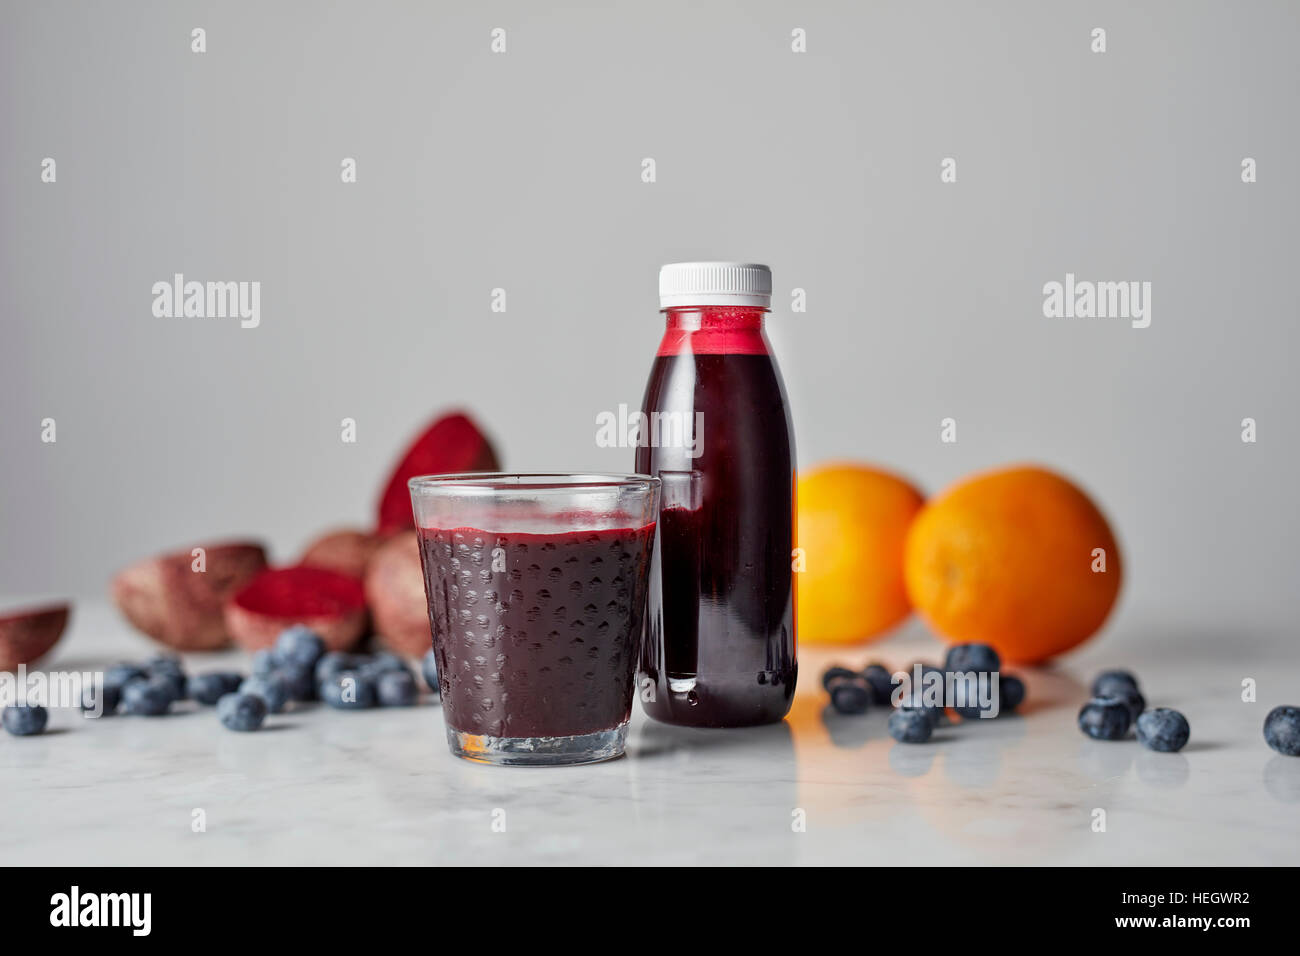 Beetroot and Orange juice fresh healthy drinking glass plastic bottle vitamin liquid glass serving extract extraction pulp Stock Photo